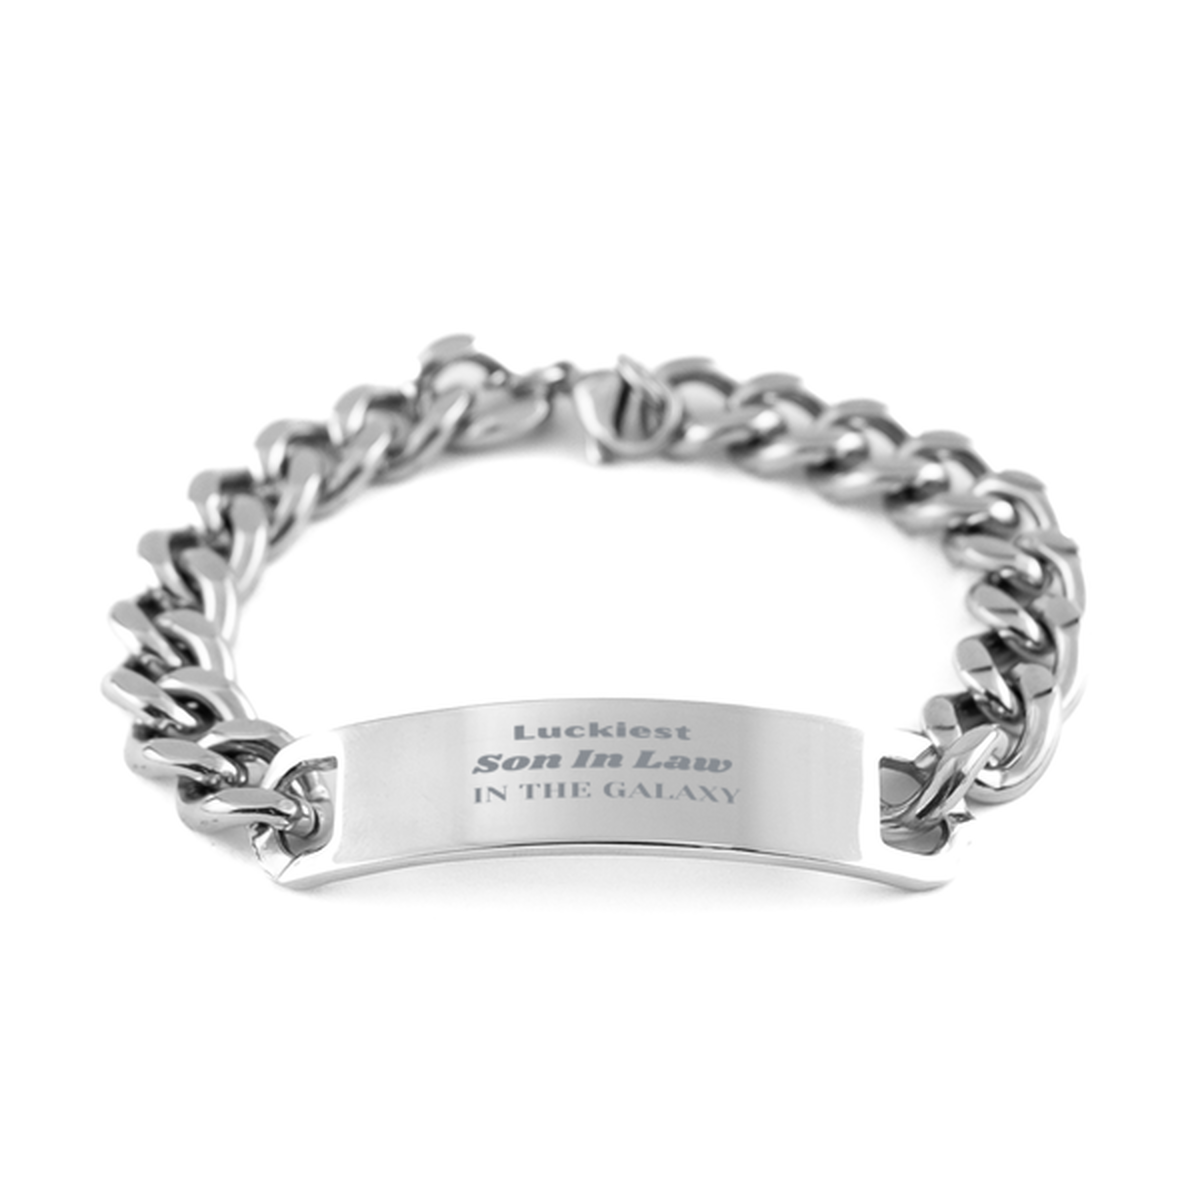 Luckiest Son In Law in the Galaxy, To My Son In Law Engraved Gifts, Christmas Son In Law Cuban Chain Stainless Steel Bracelet Gifts, X-mas Birthday Unique Gifts For Son In Law Men Women